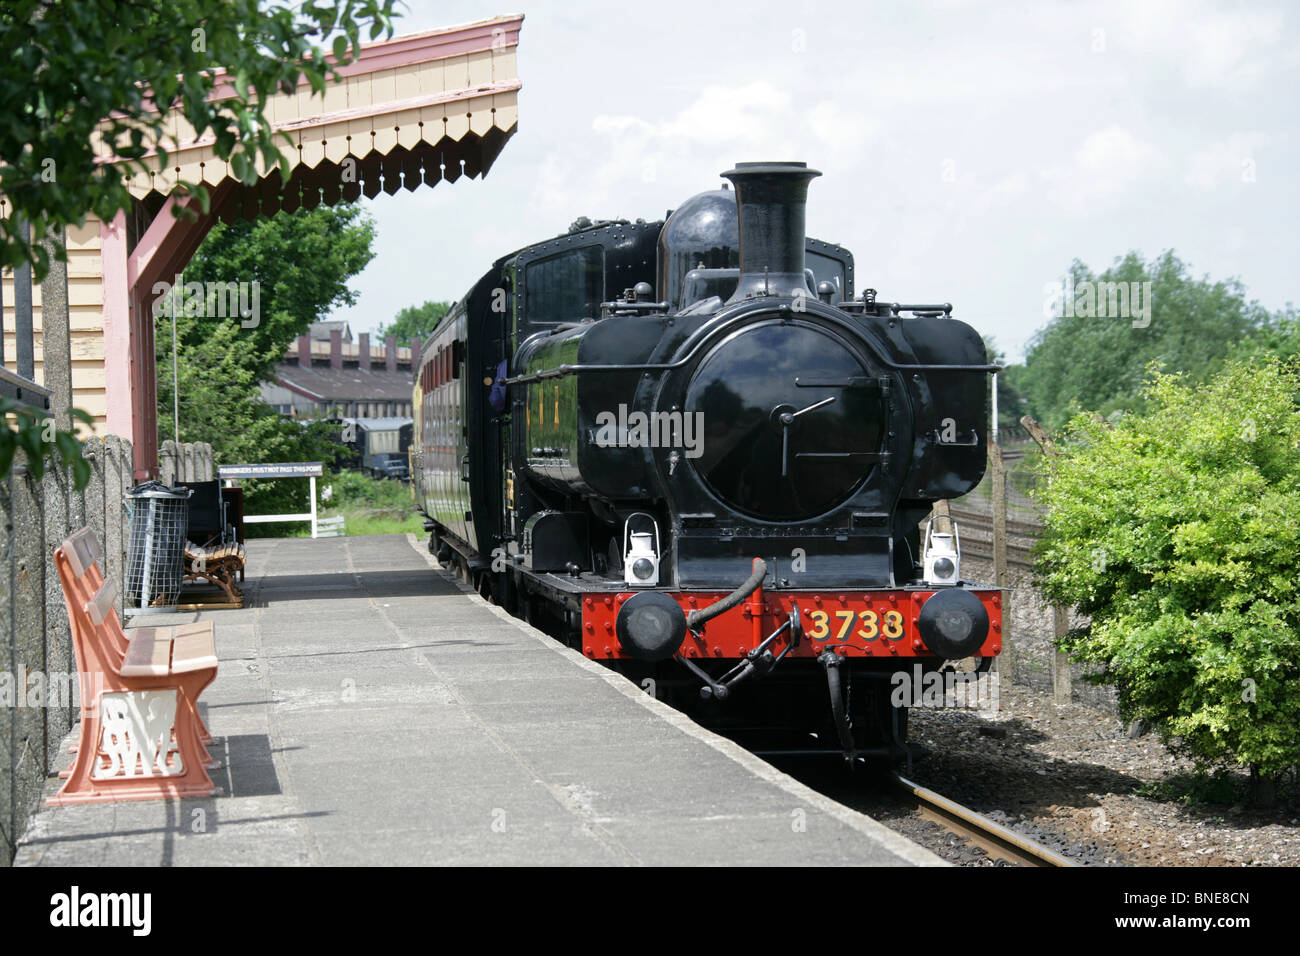 No. 3738, Great Western Railway Steam Locomotive, Didcot Railway Centre and Museum, Didcot, Oxfordshire. Stock Photo